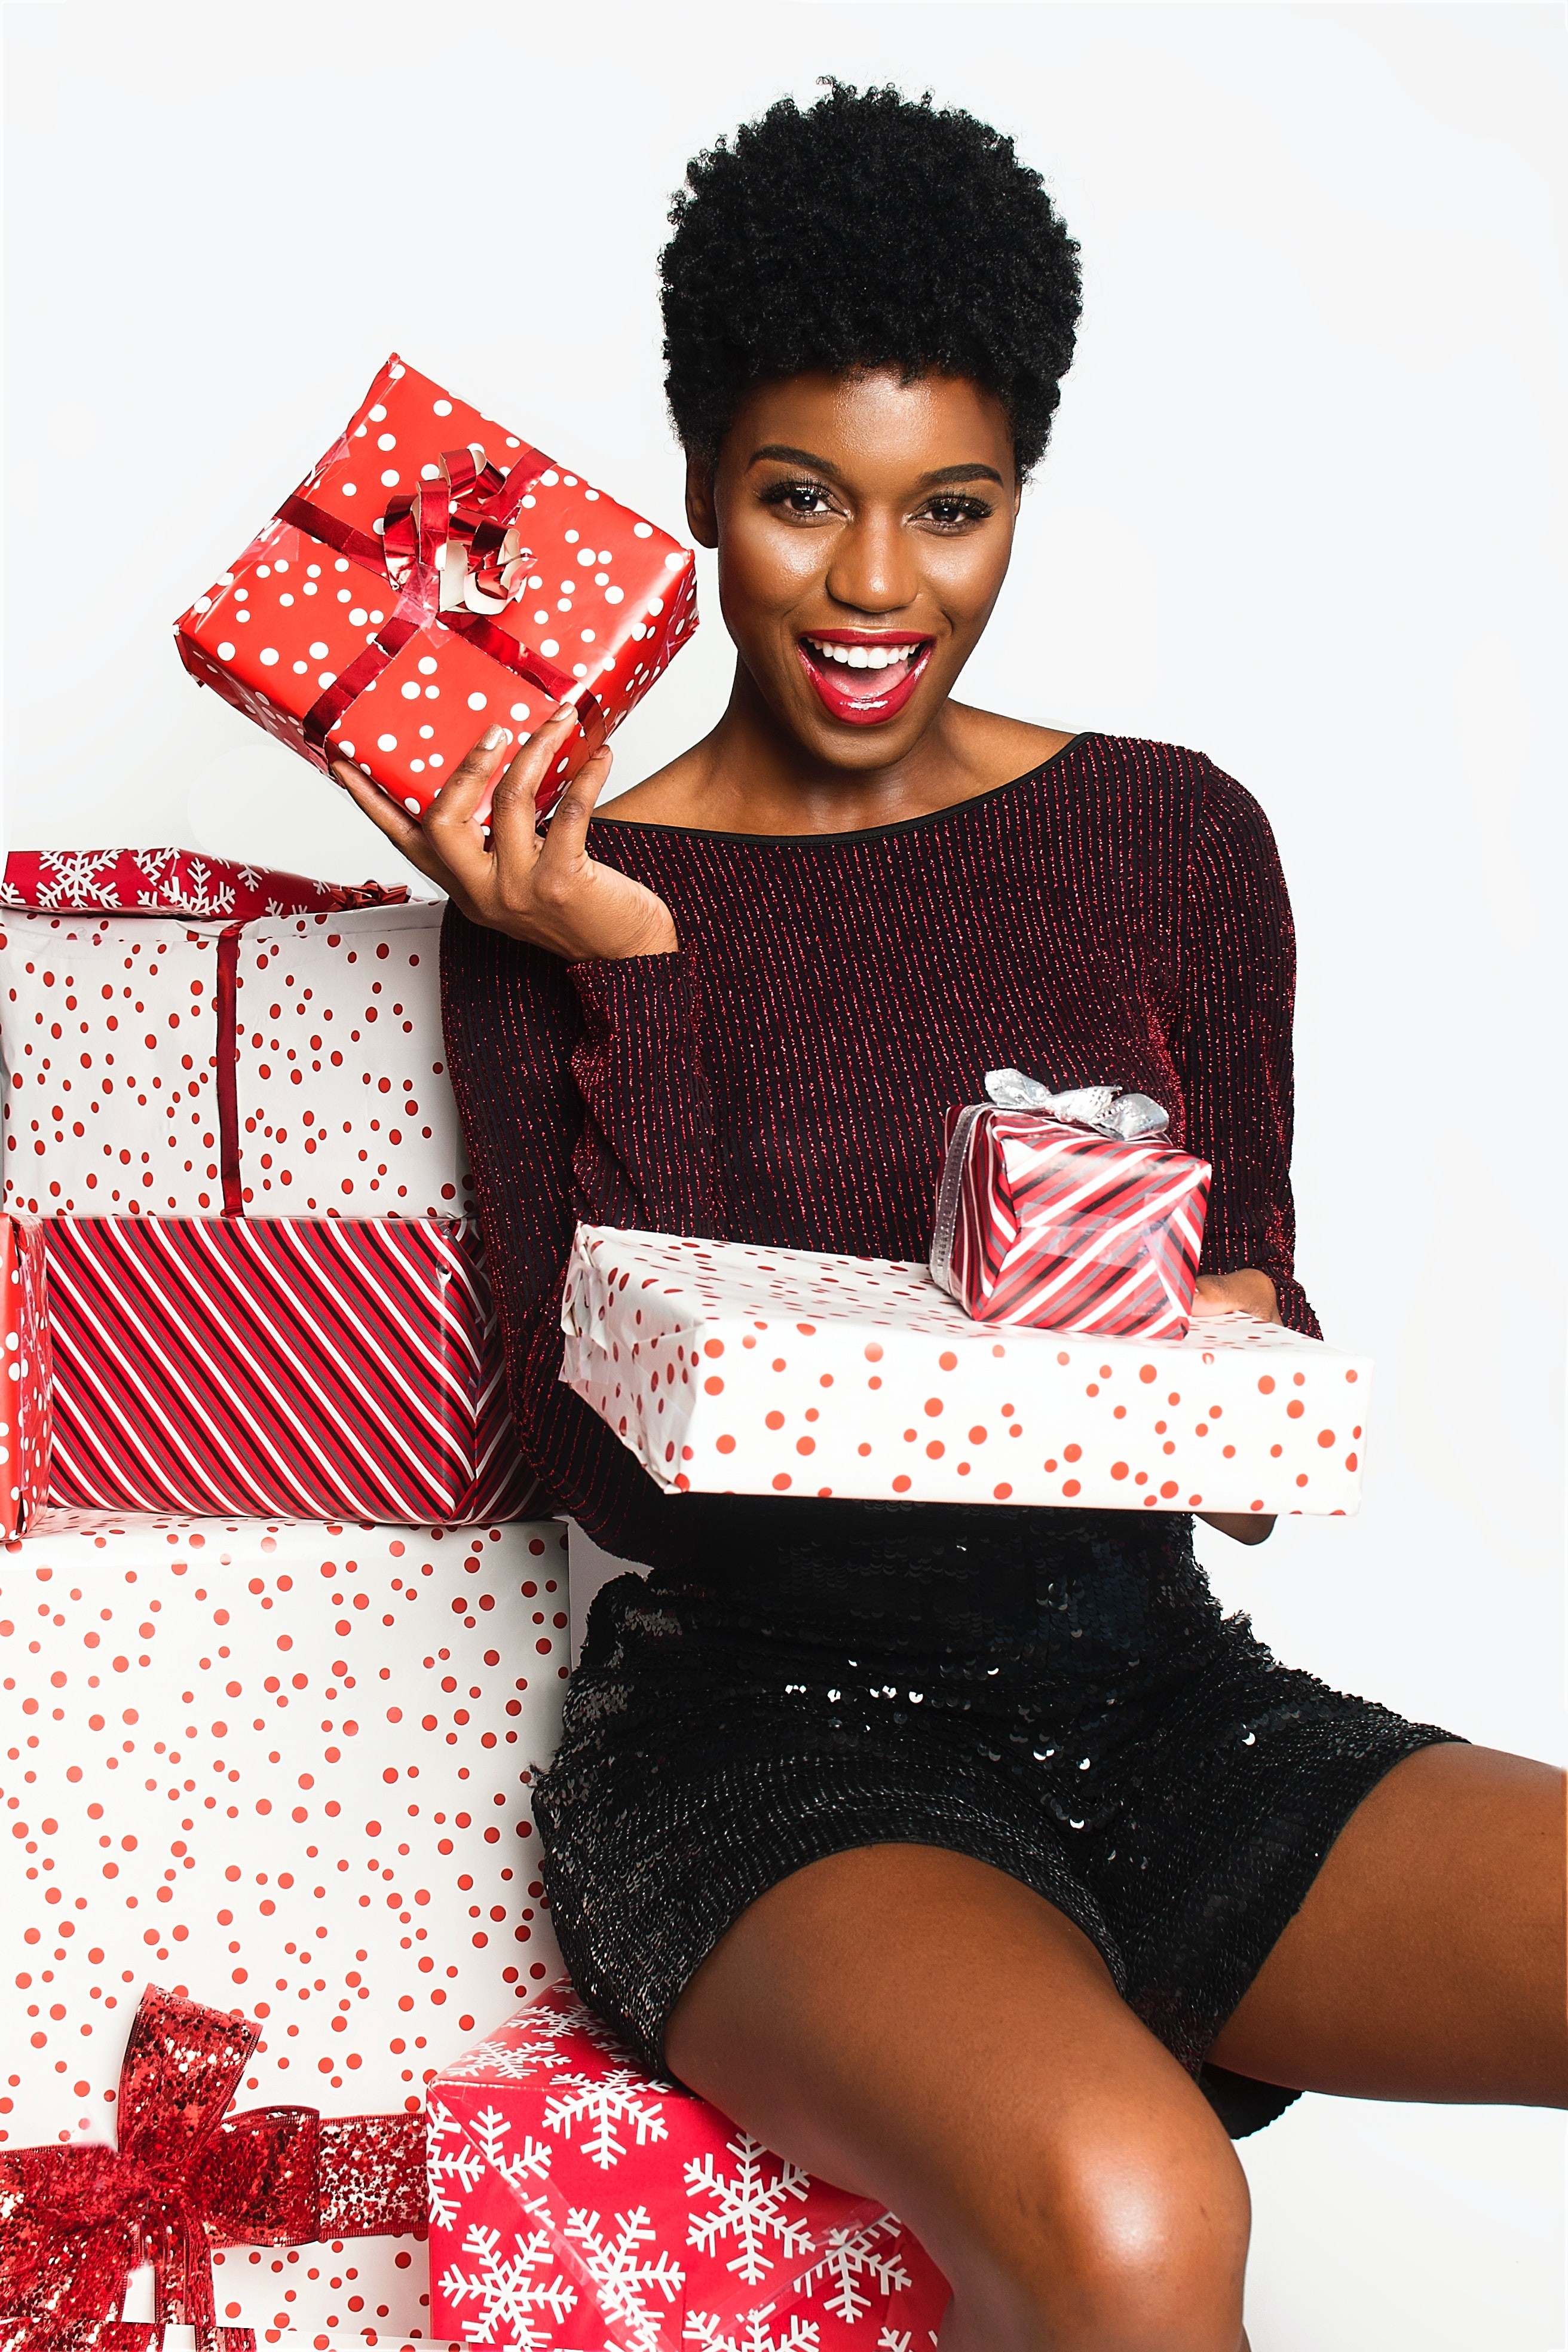 Black woman with Christmas gifts